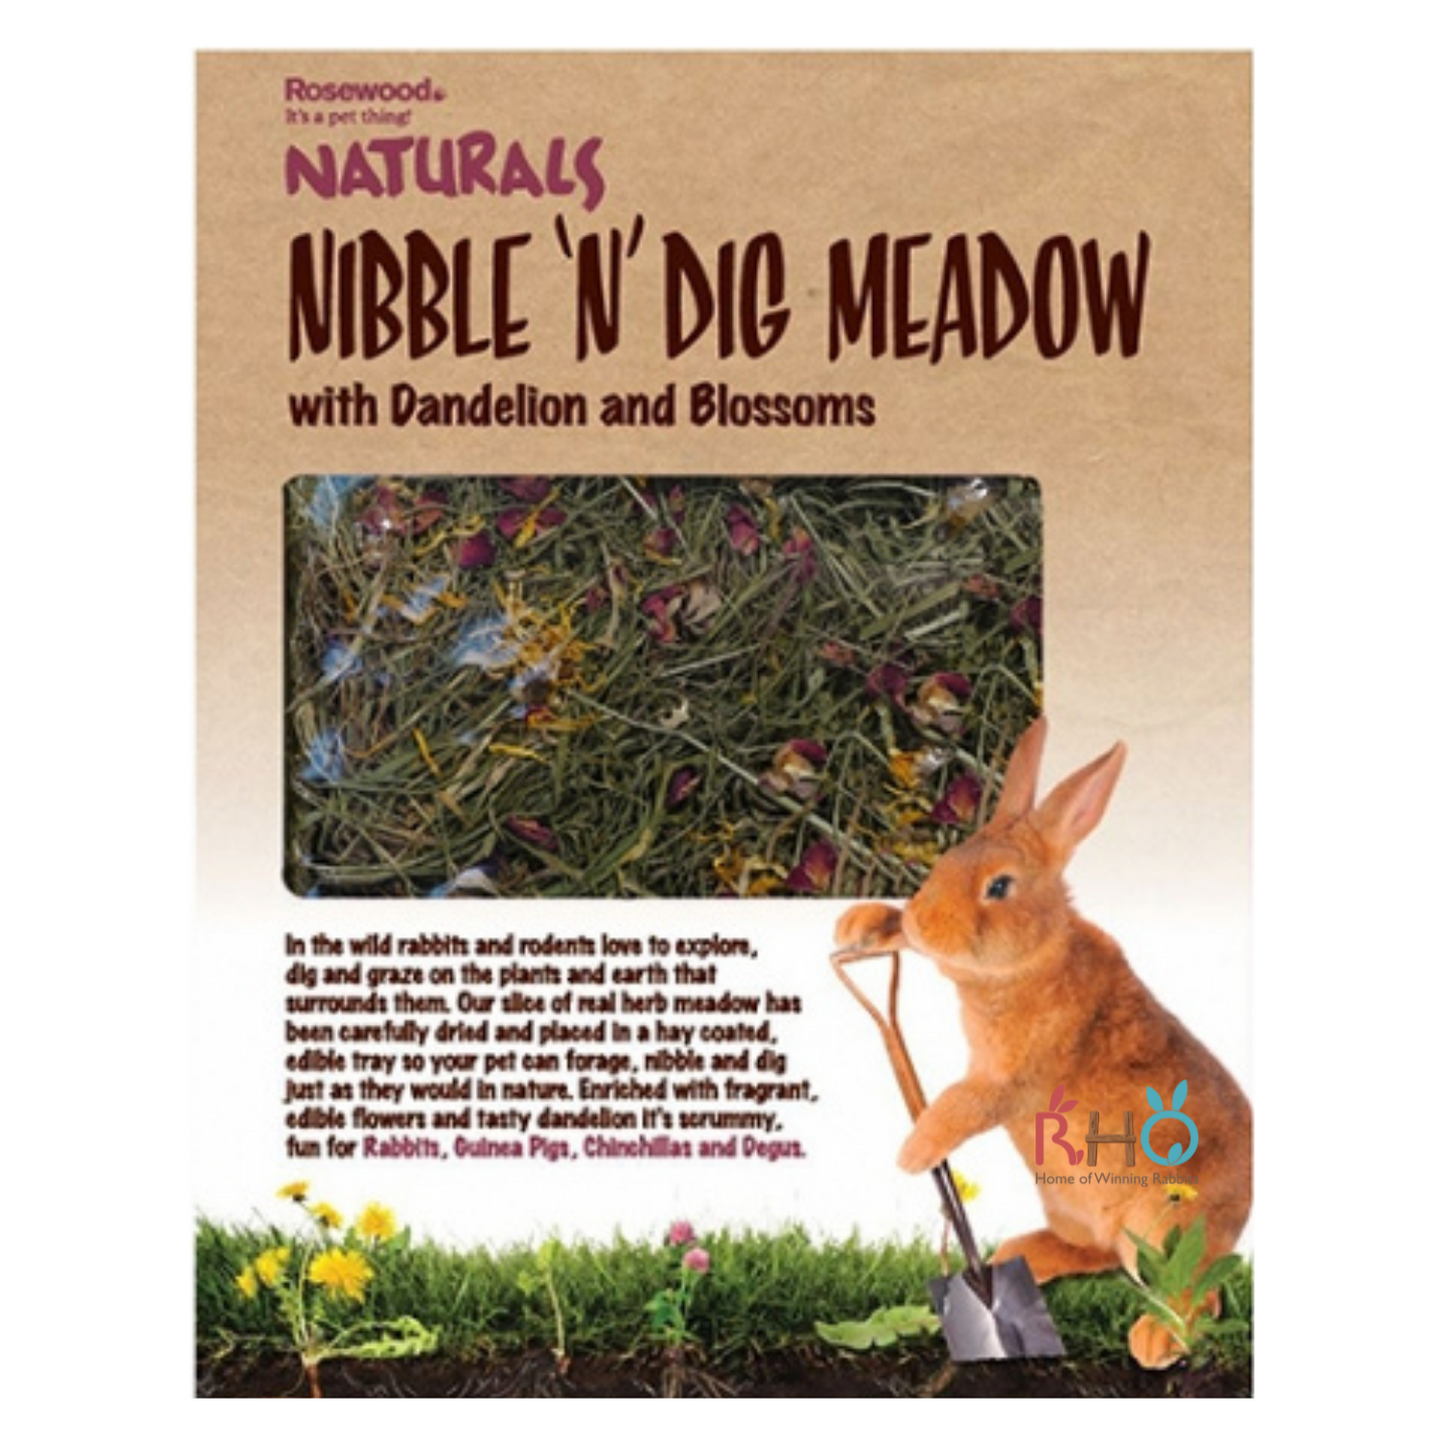 Rosewood - Naturals Nibble & Dig Meadow 200g